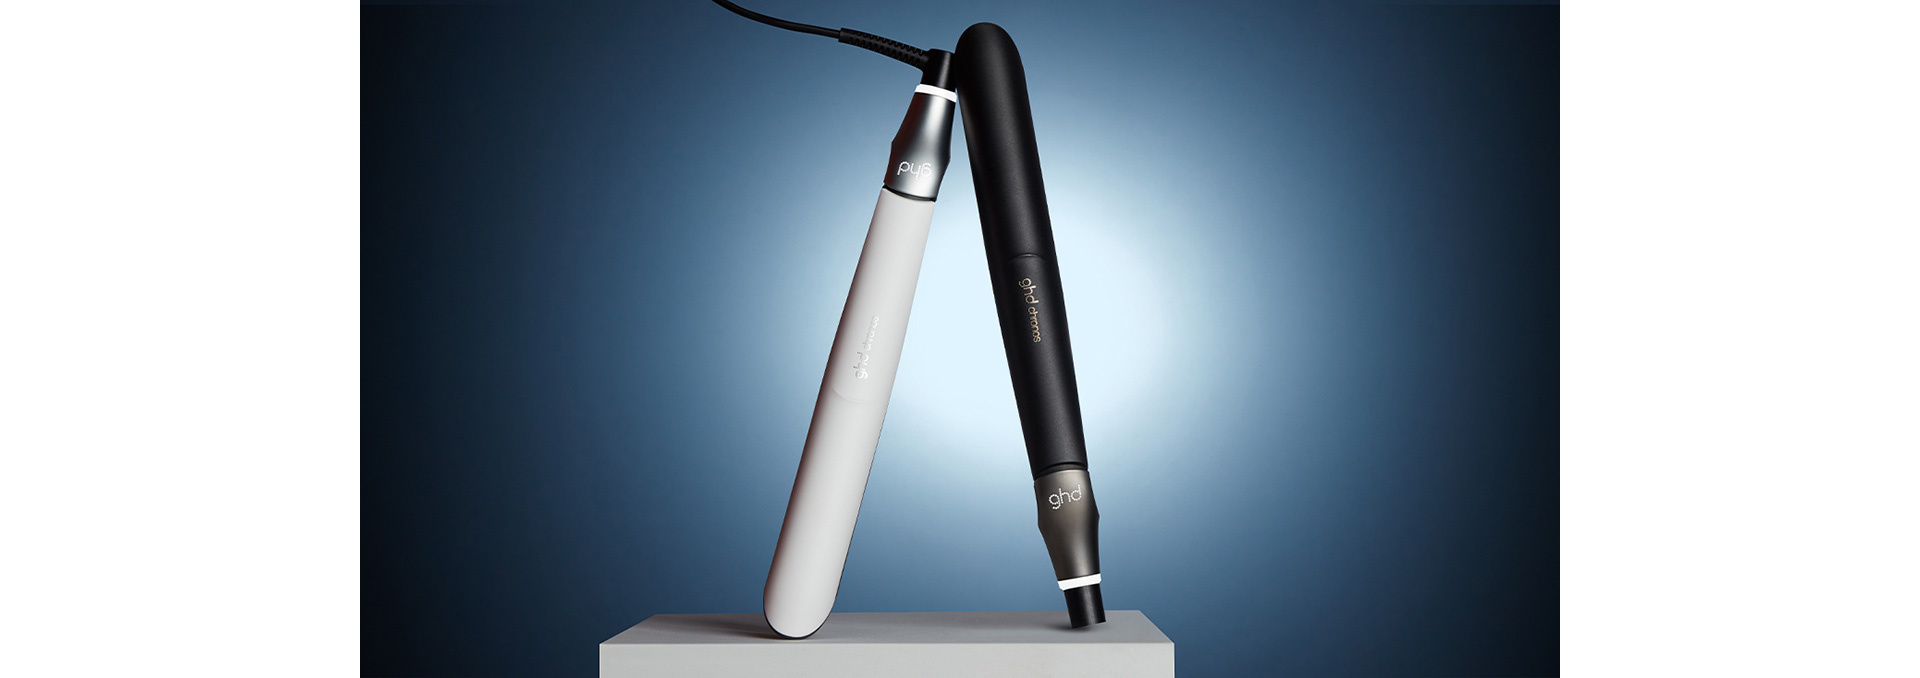 Introducing Chronos, the newest advanced styler from GHD